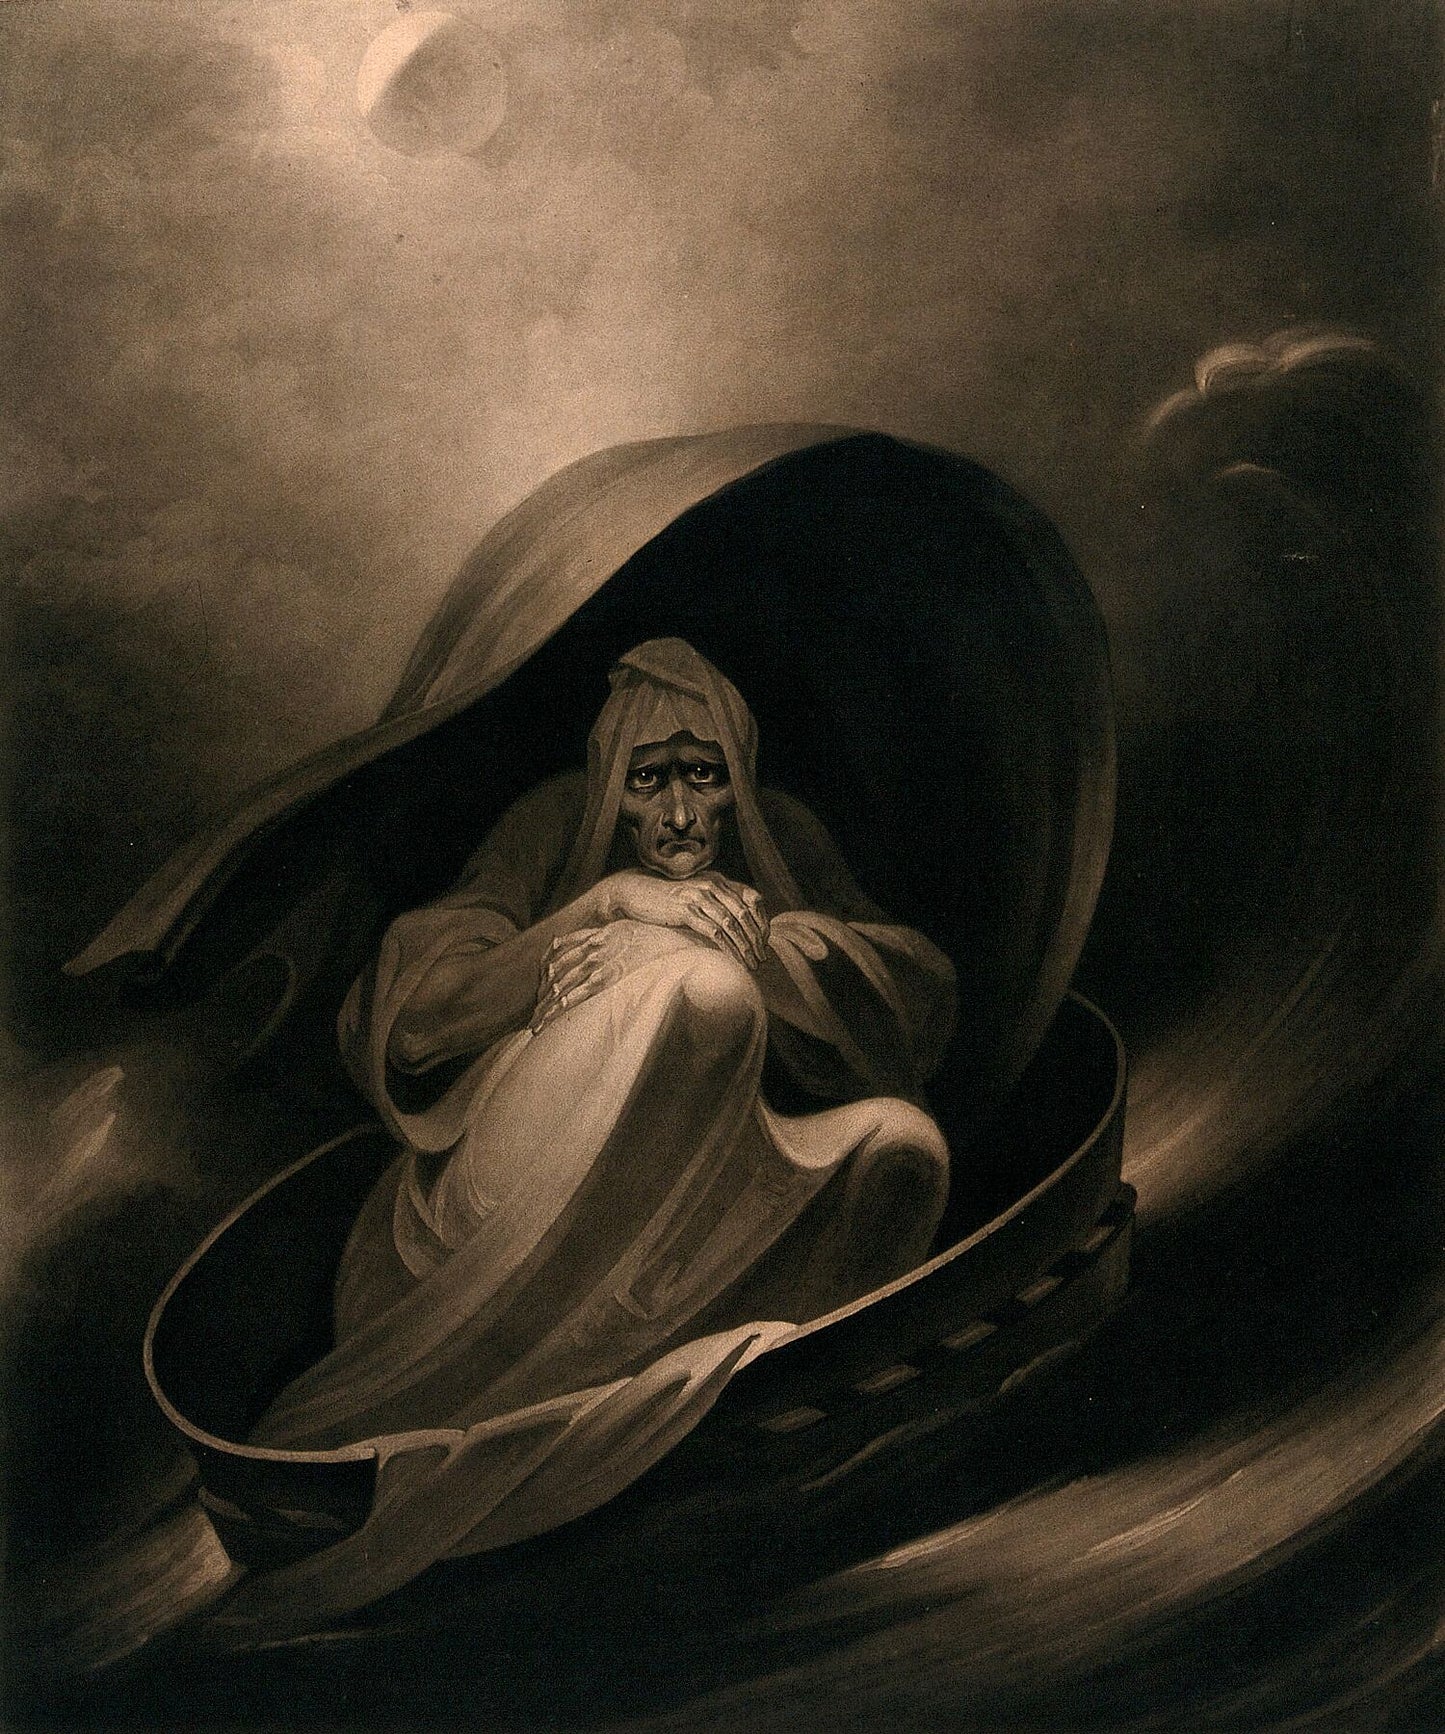 A Witch Surfing on a Sieve, Mezzotint by C. Turner - 1807